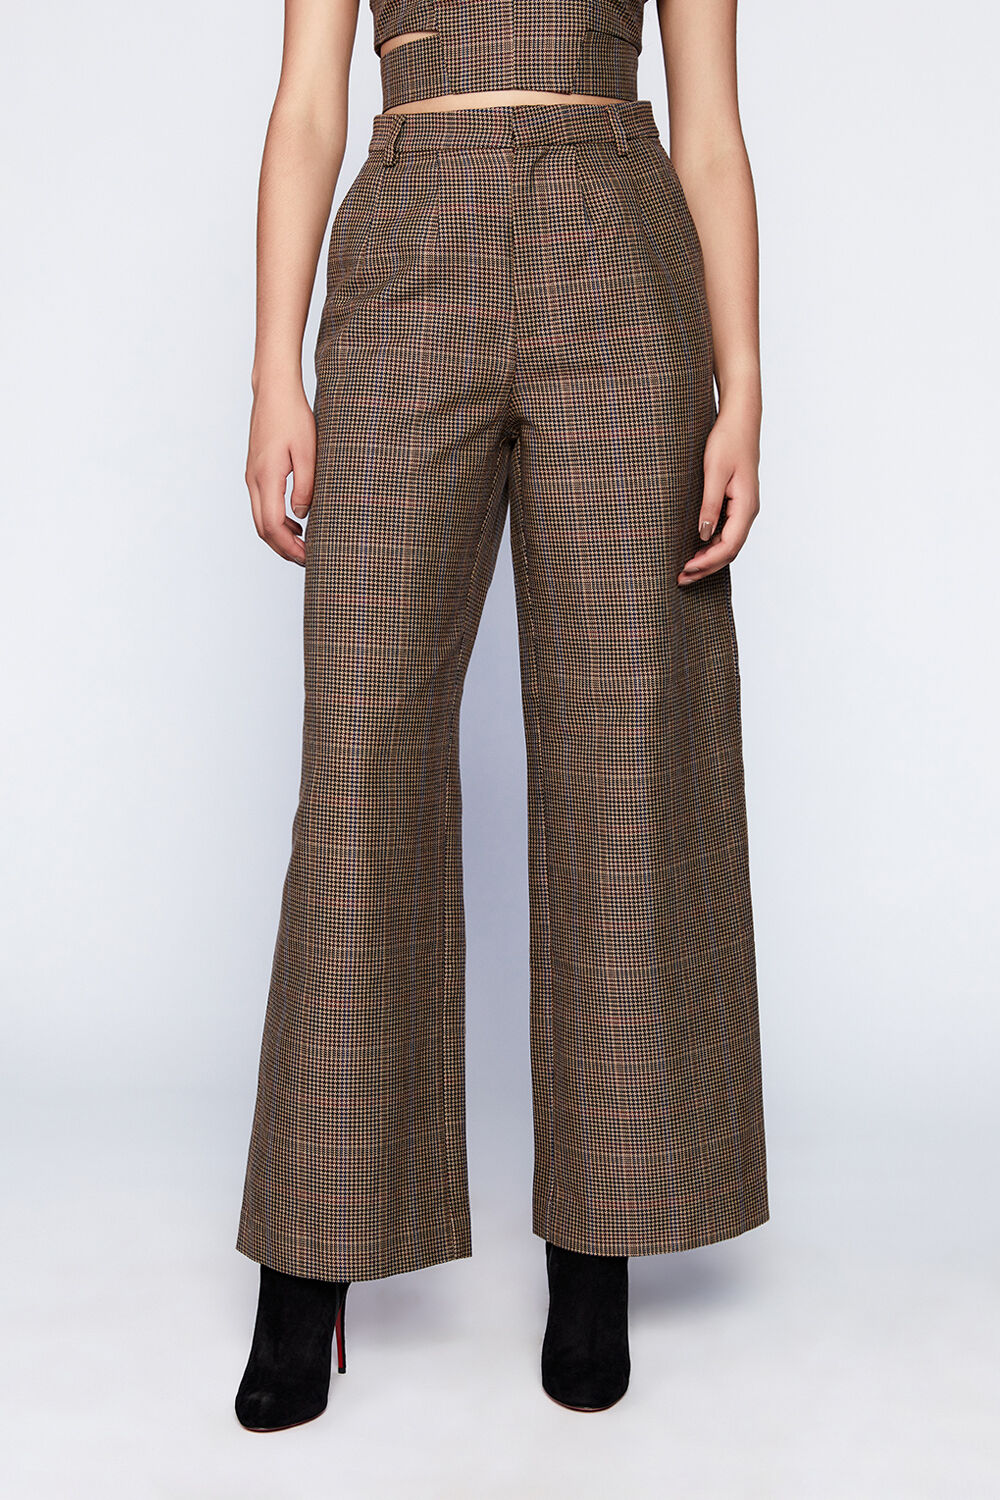 CHECK TUCK PANT in colour TOBACCO BROWN